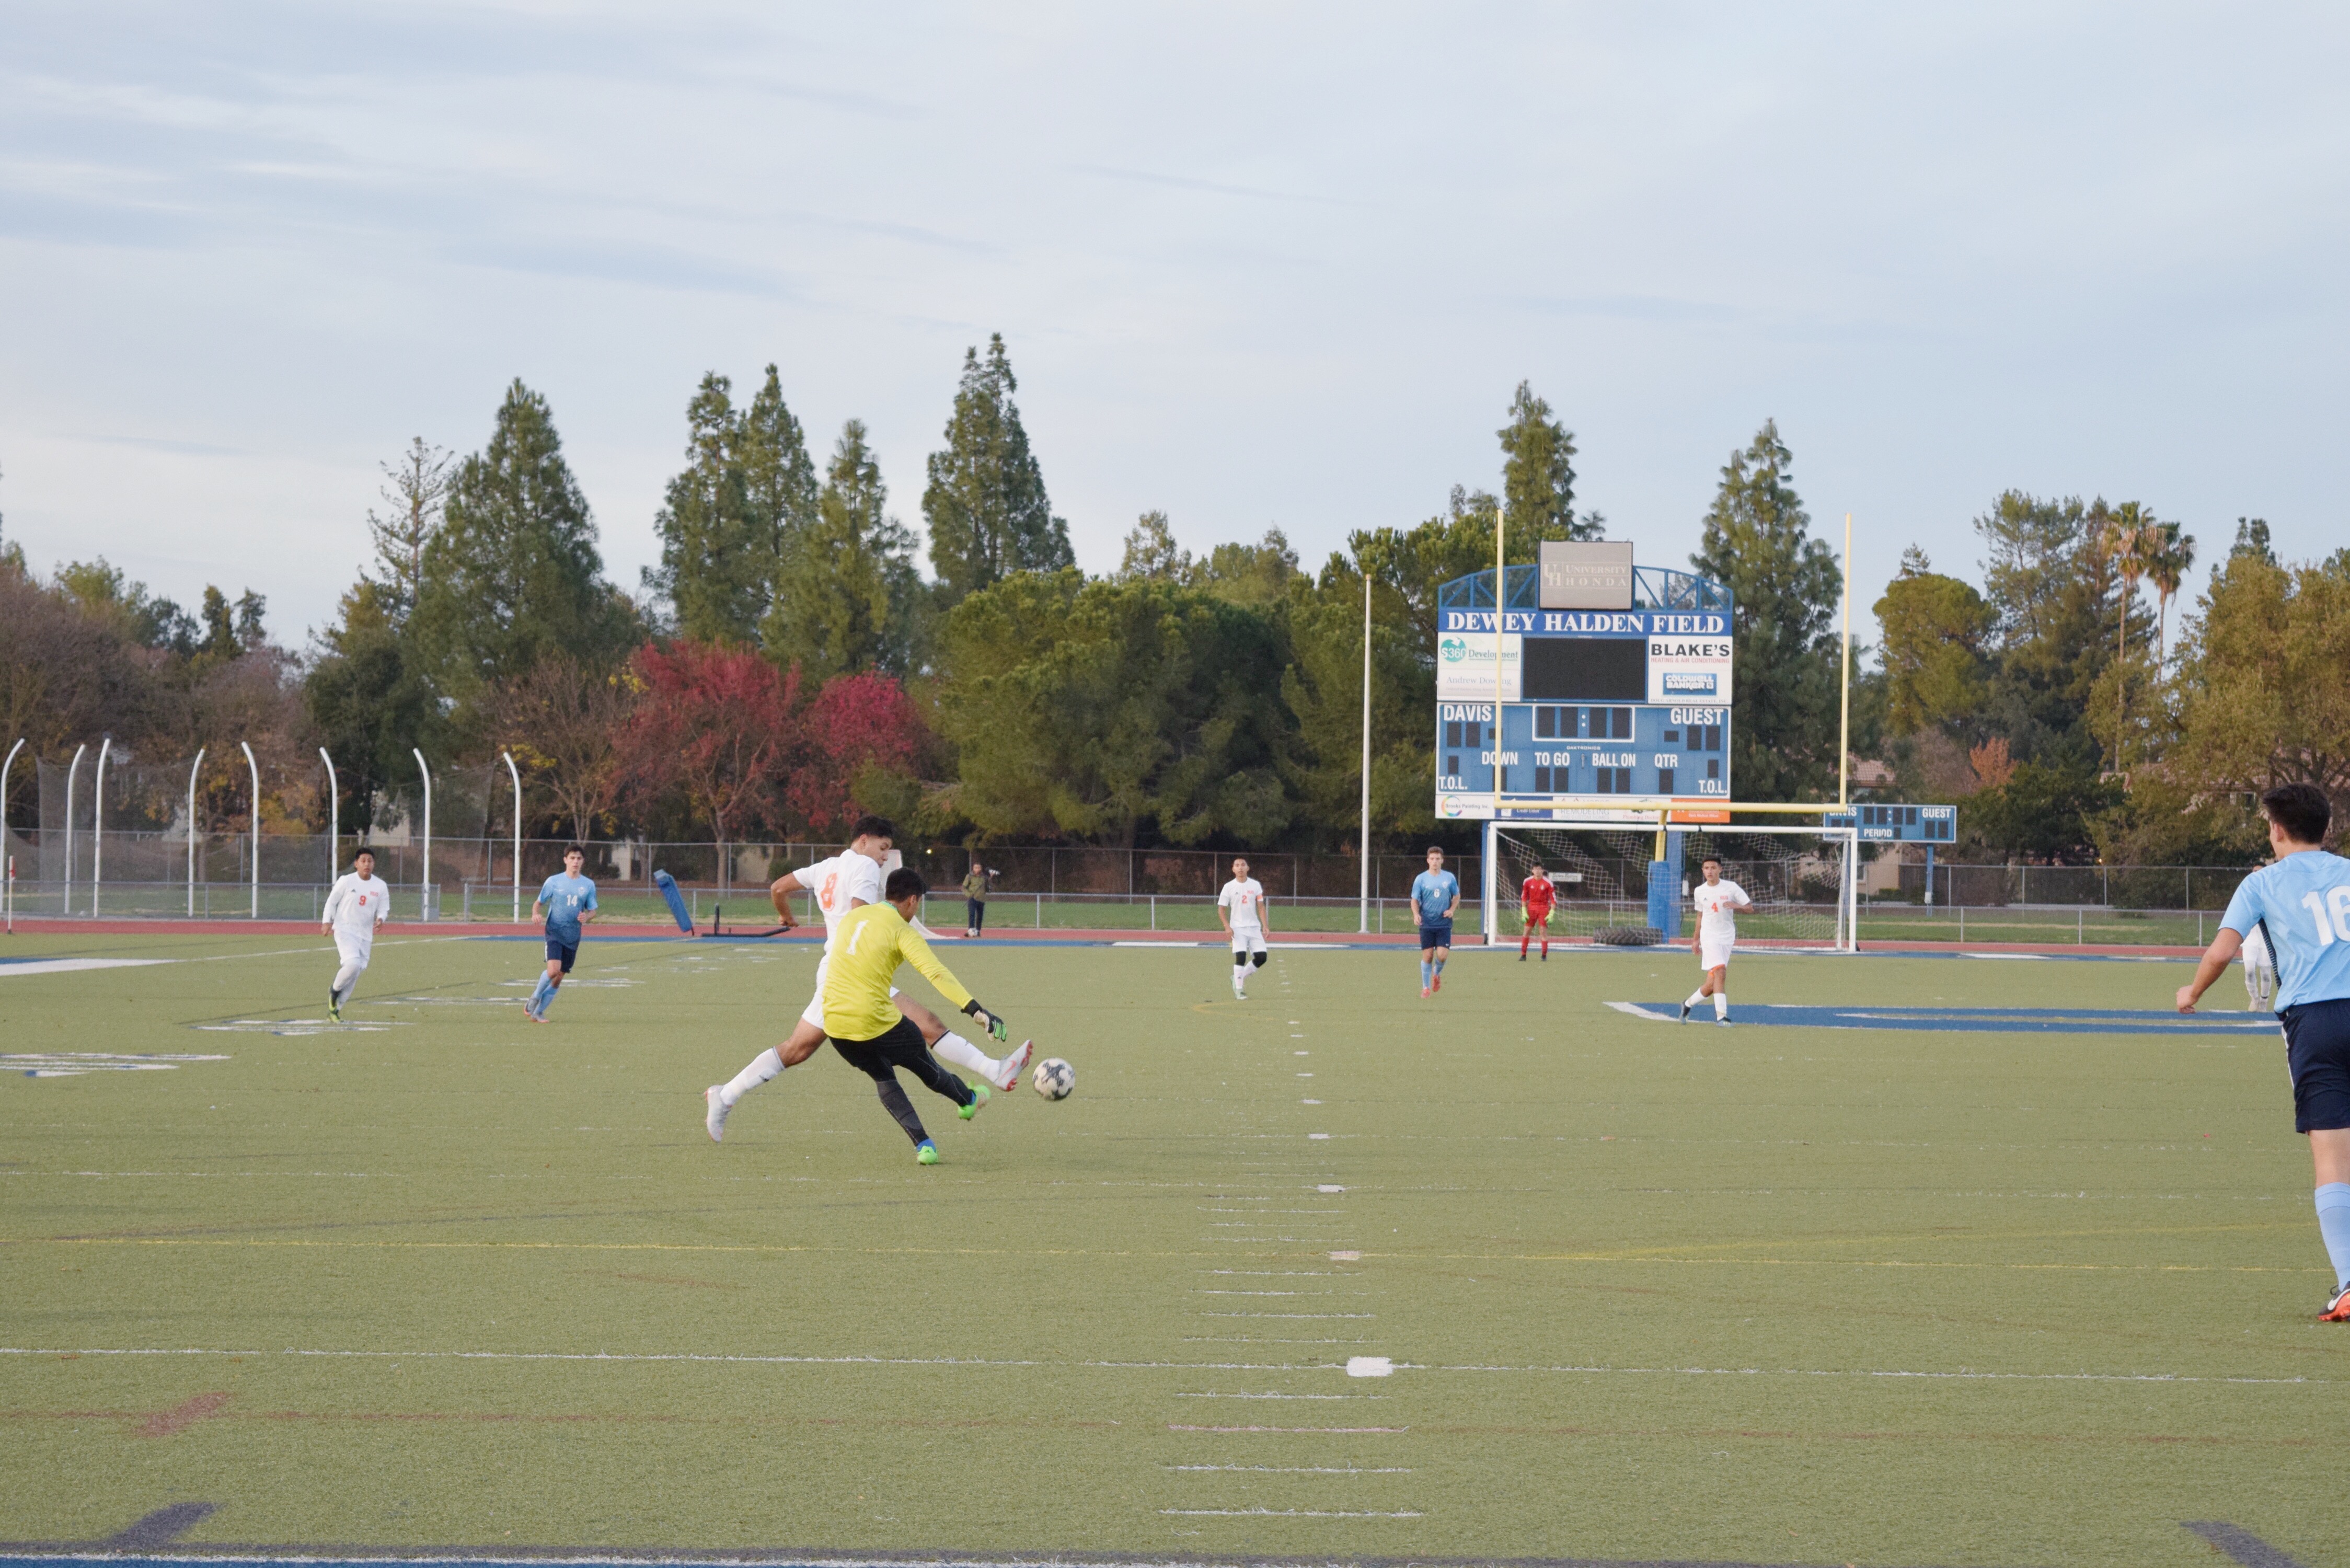 Goalkeeper Cory Kodira clears the ball away from a Woodland attacker.